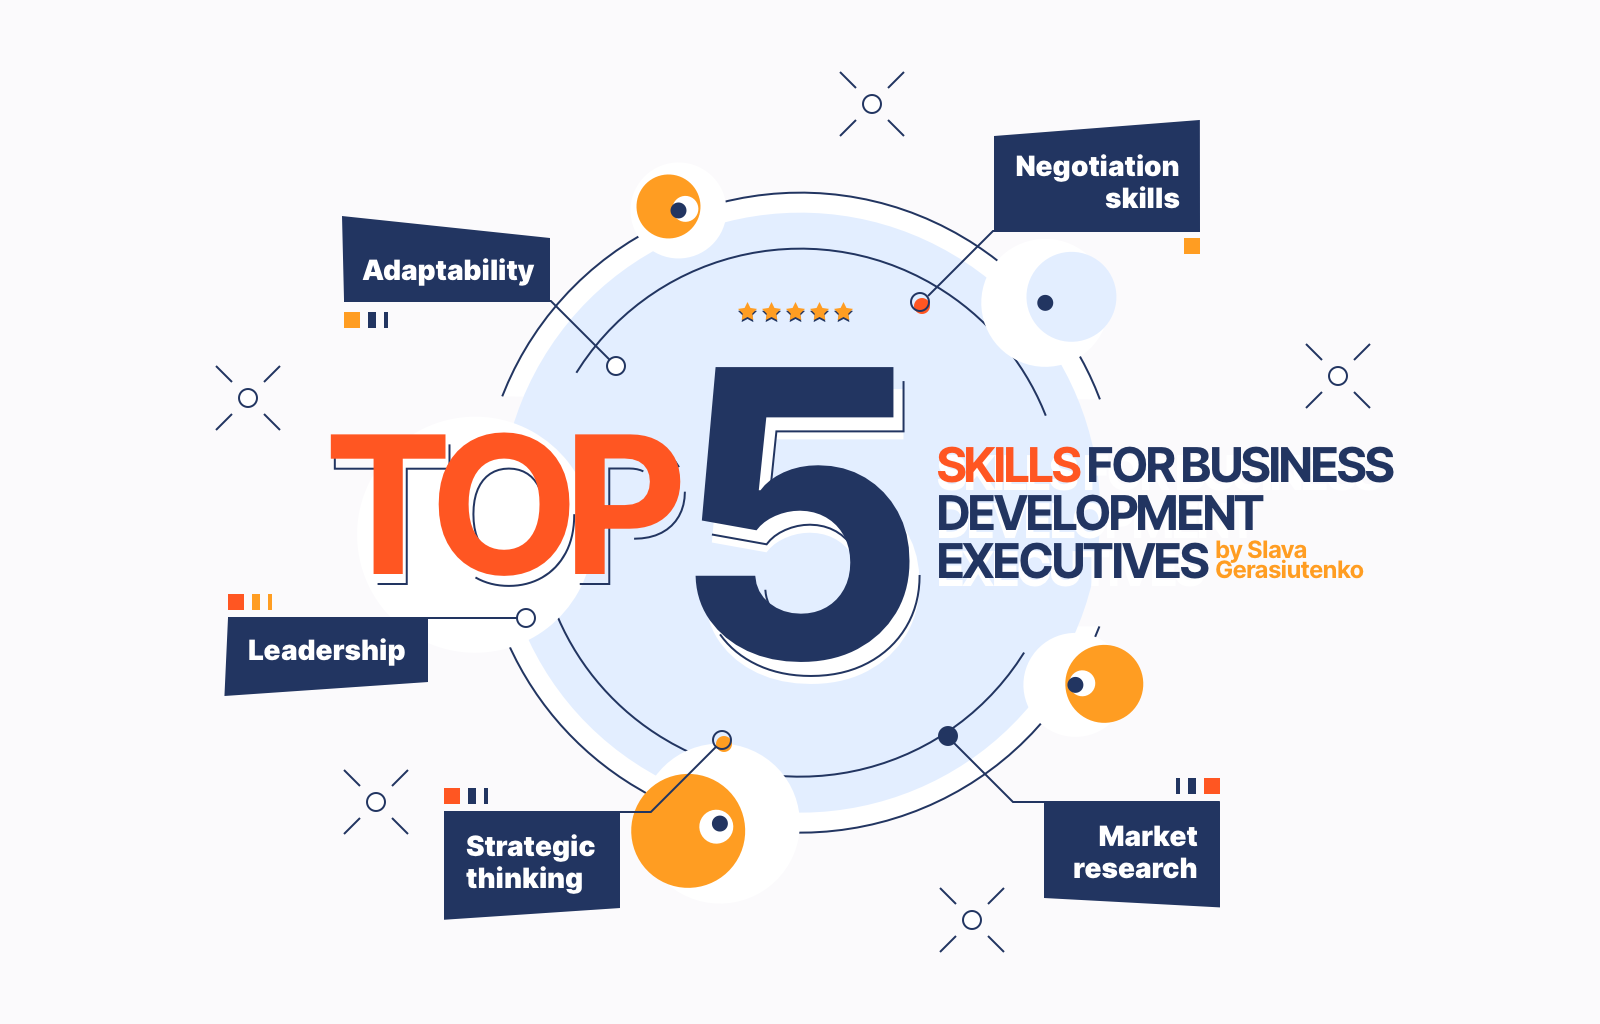 Top 5 Skills for Business Development Executives